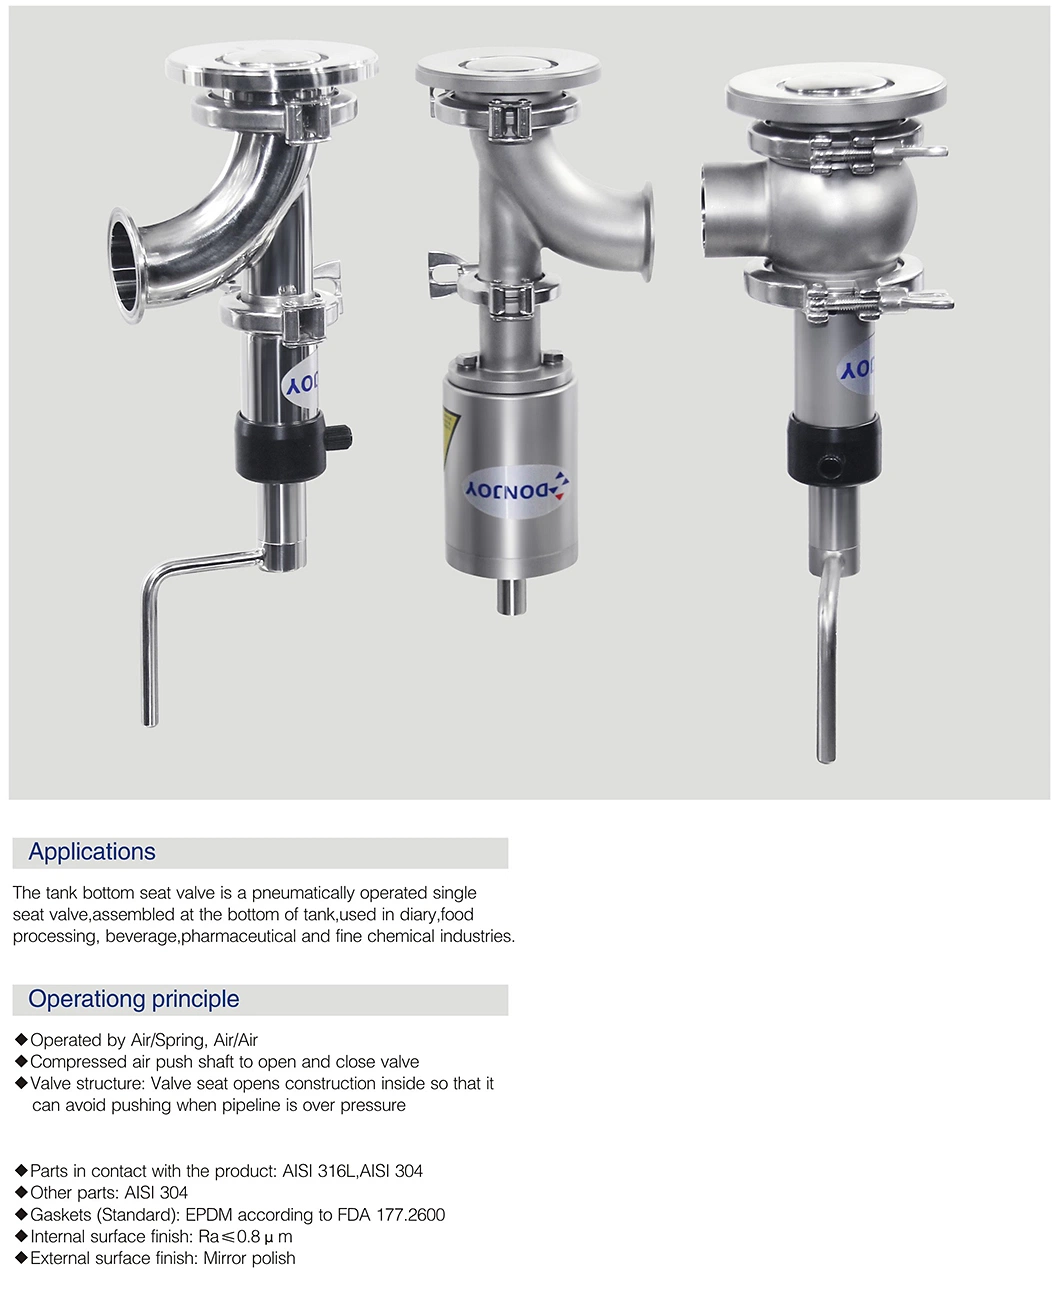 3A Hygienic Air Operated Tank Bottom Valve for Dairy Beverage Pharmaceutical